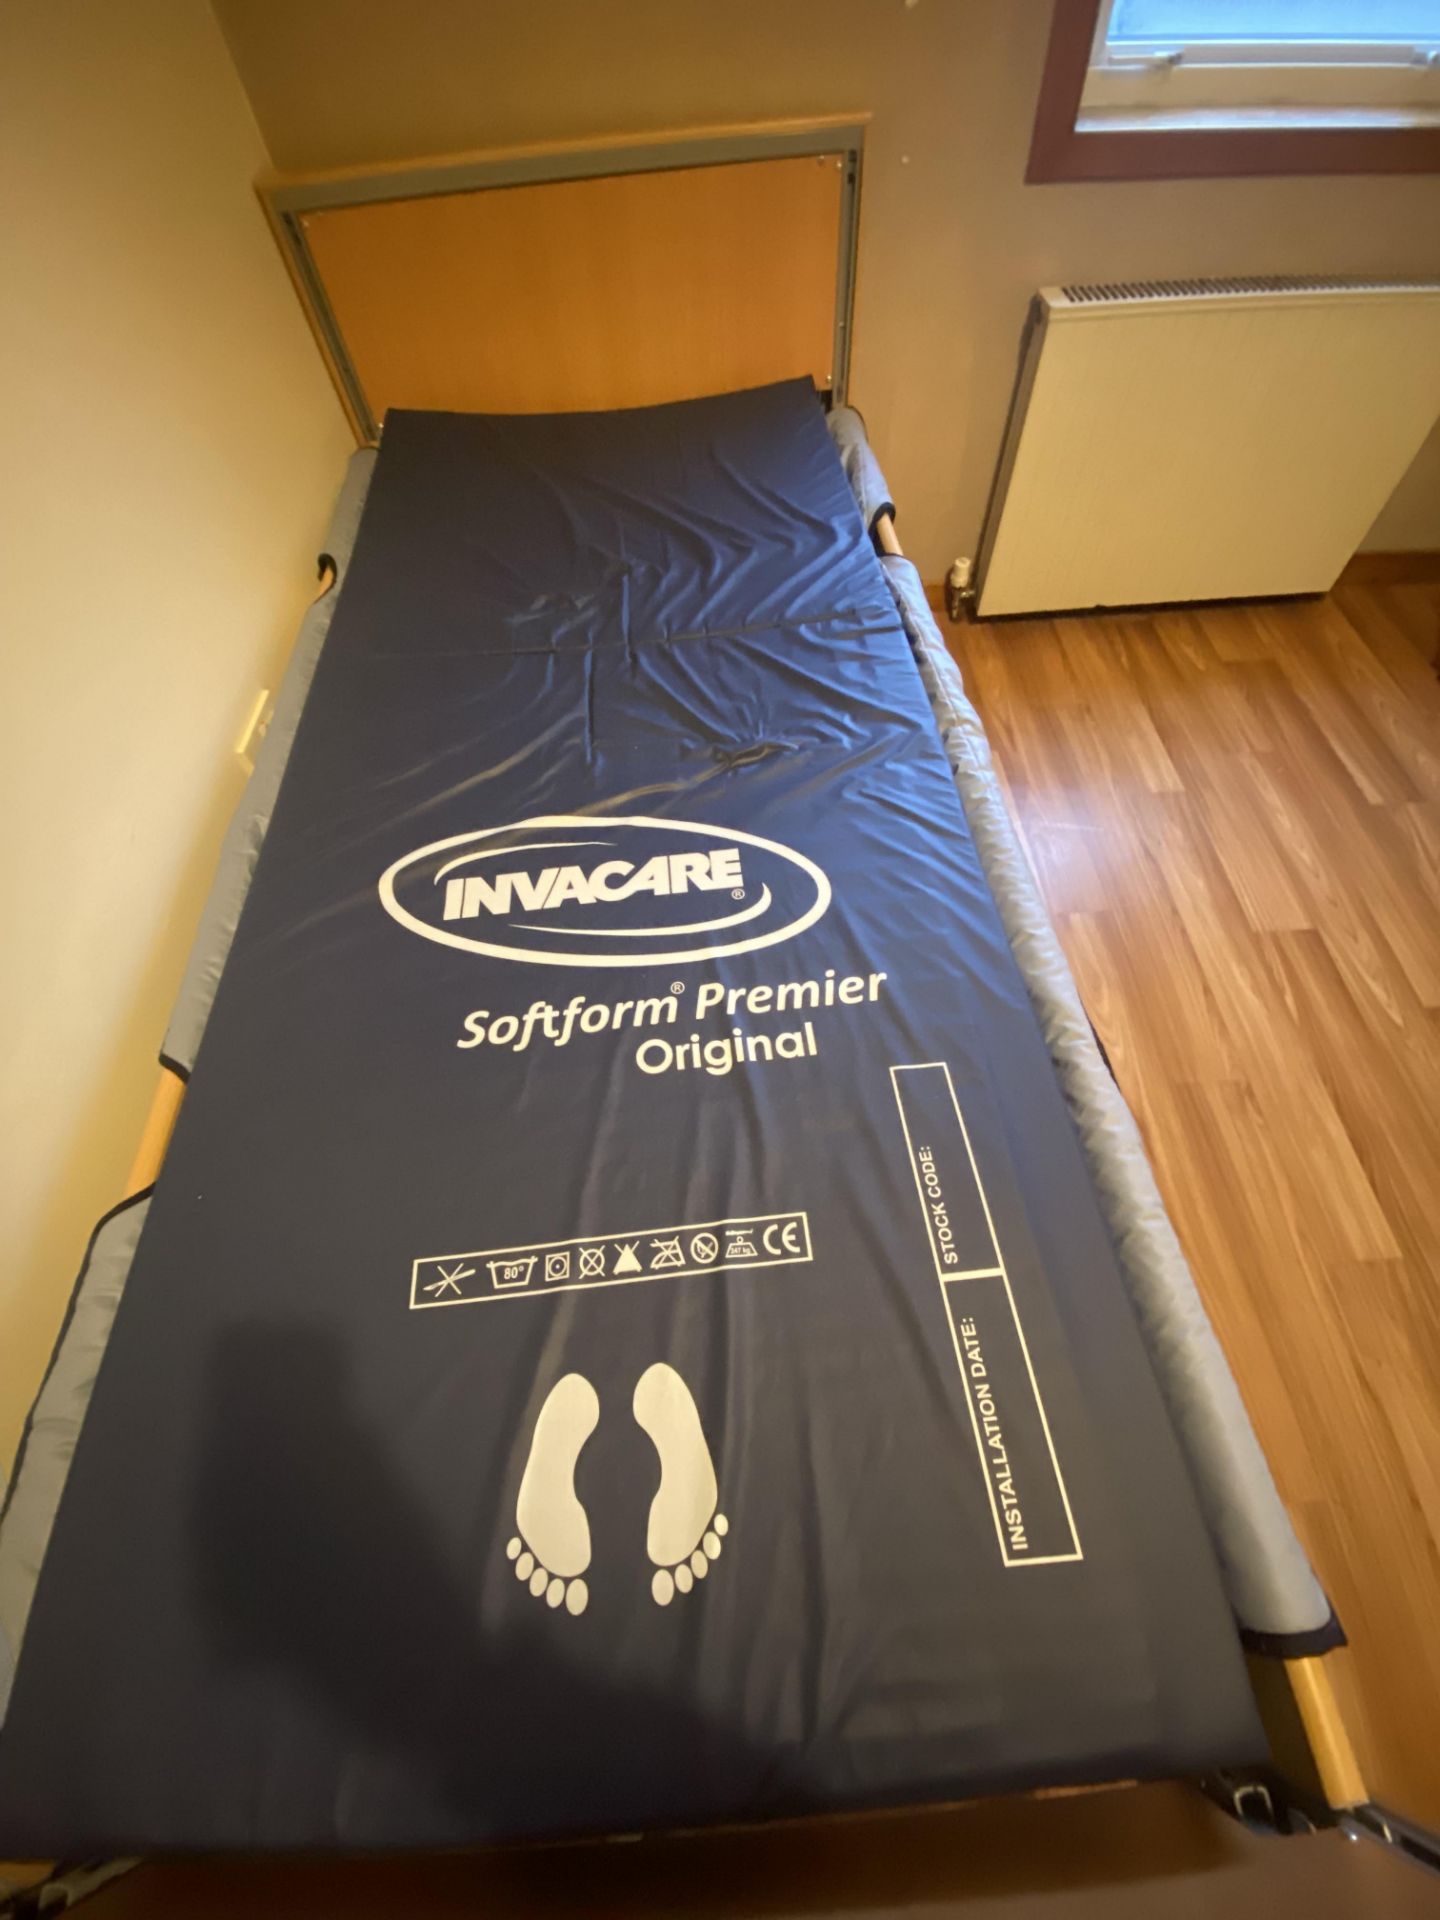 Invacare Mobile Adjustable Height Bed Frame, with Invacare soft foam premier mattress (Room 4) - Image 3 of 3